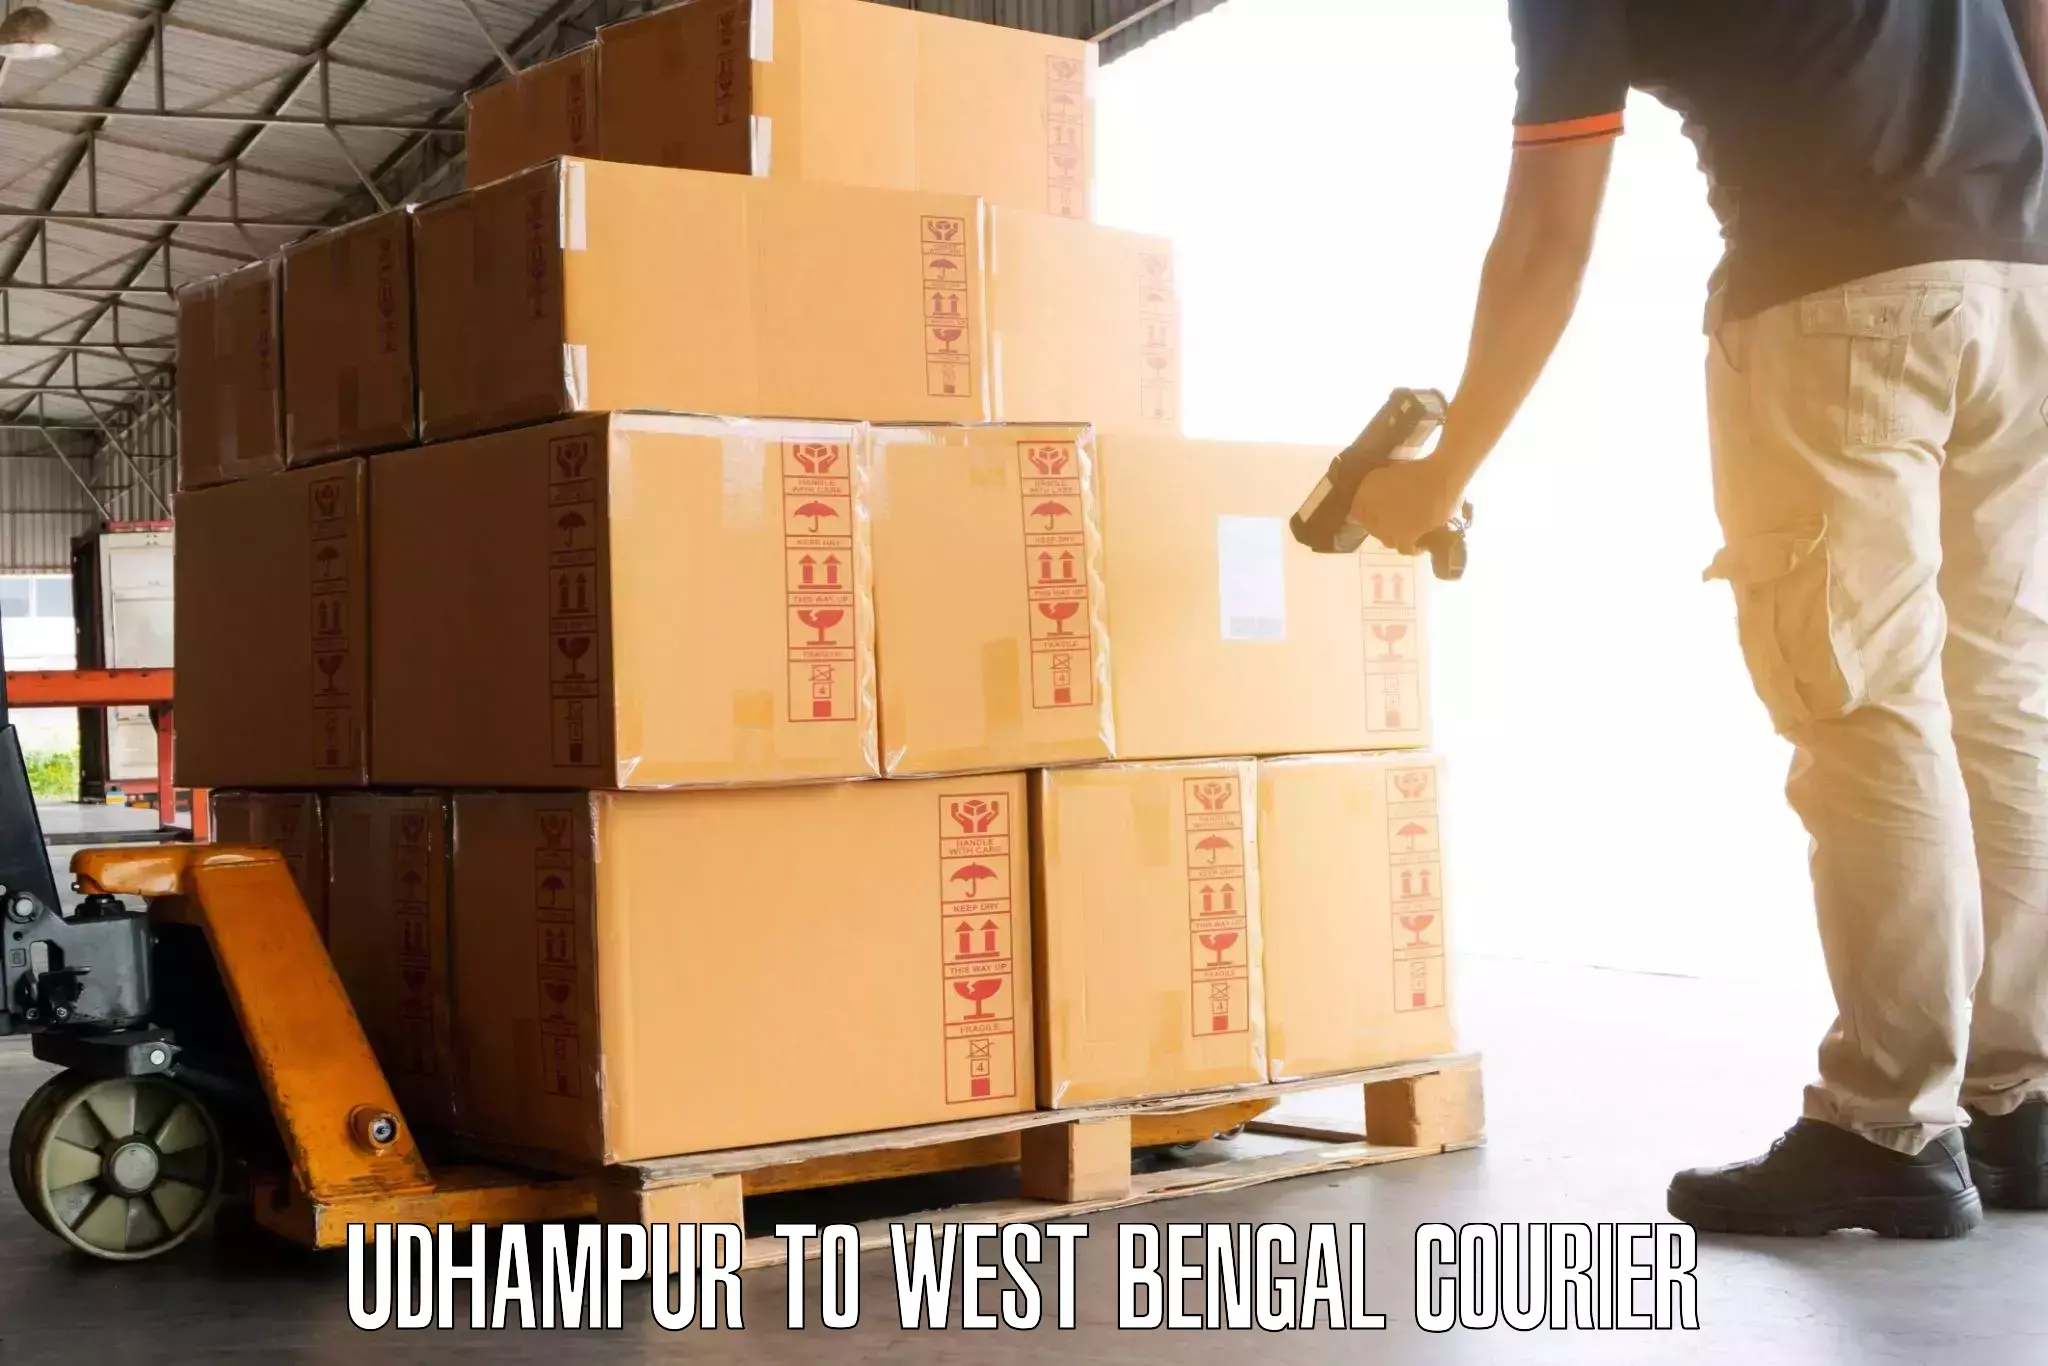 Luggage transport consultancy Udhampur to Budge Budge